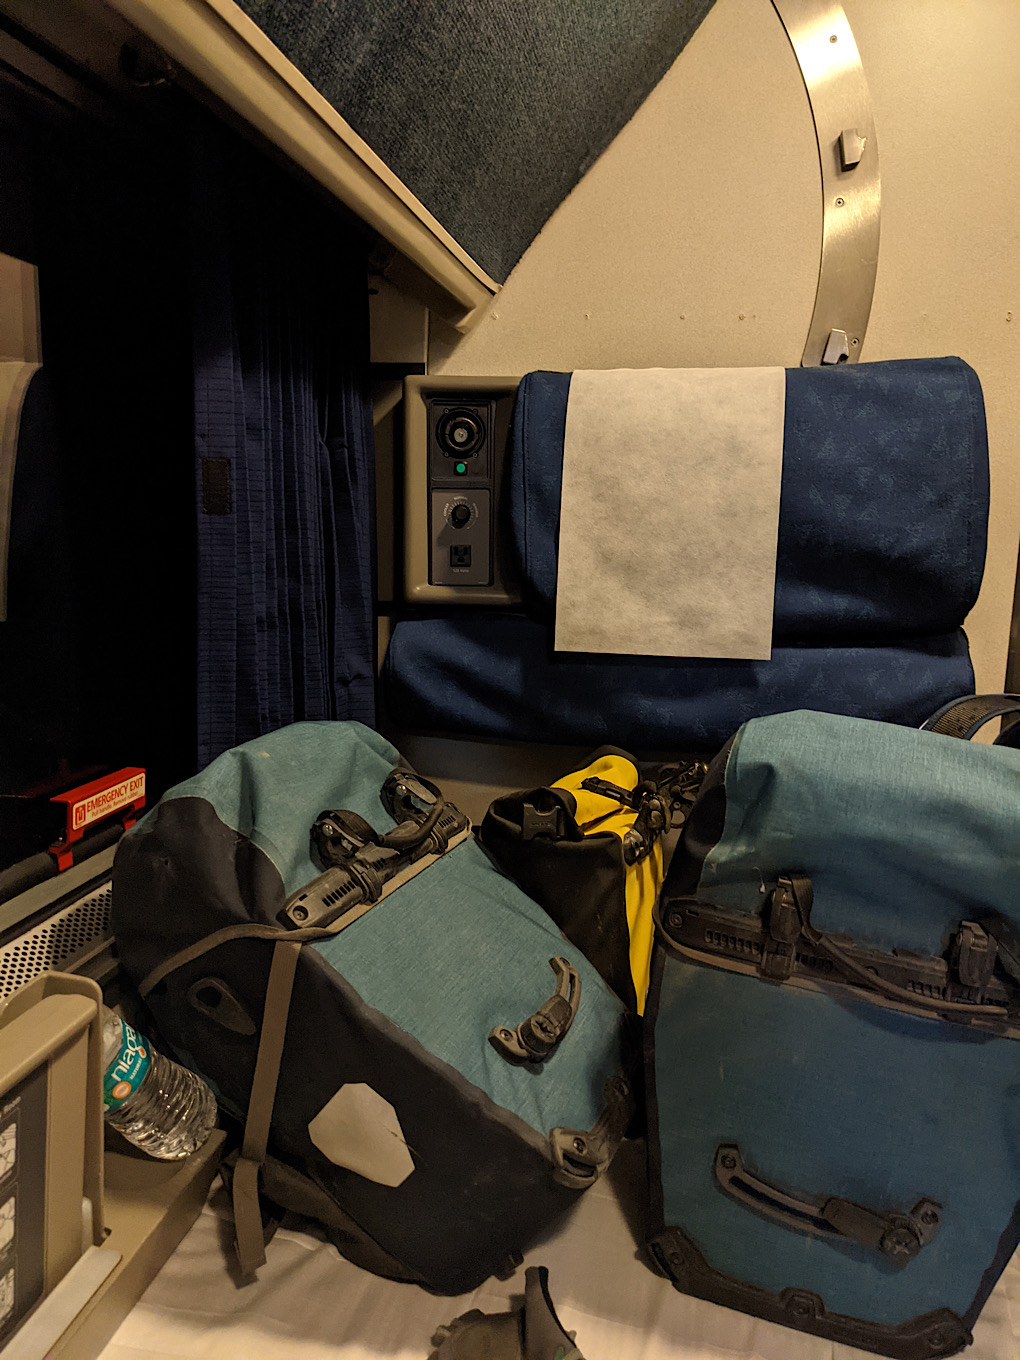 Amtrak roomettes are hard to photograph, but cozy.